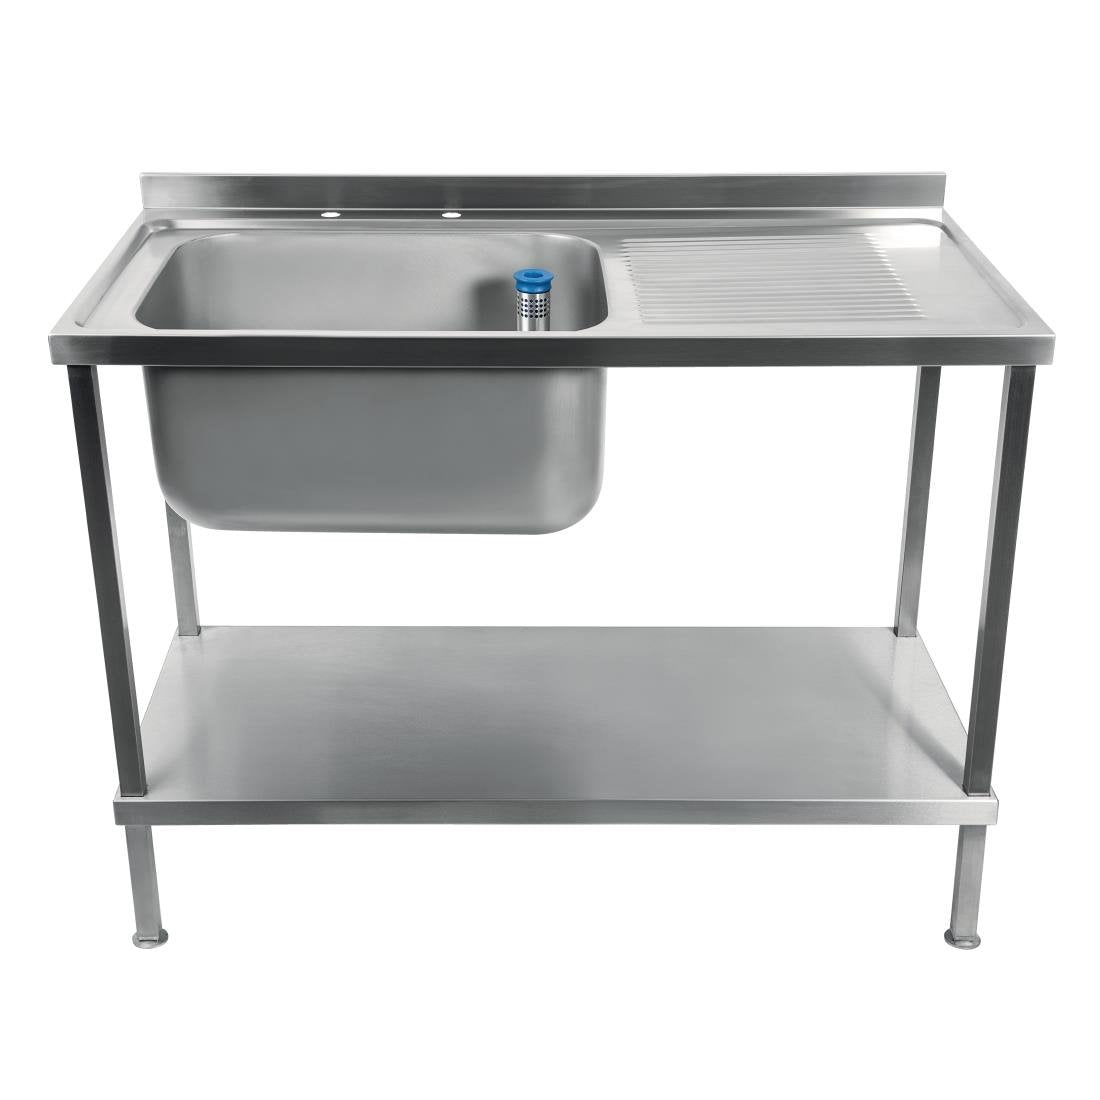 DR386 Holmes Fully Assembled Stainless Steel Sink Right Hand Drainer 1500mm JD Catering Equipment Solutions Ltd